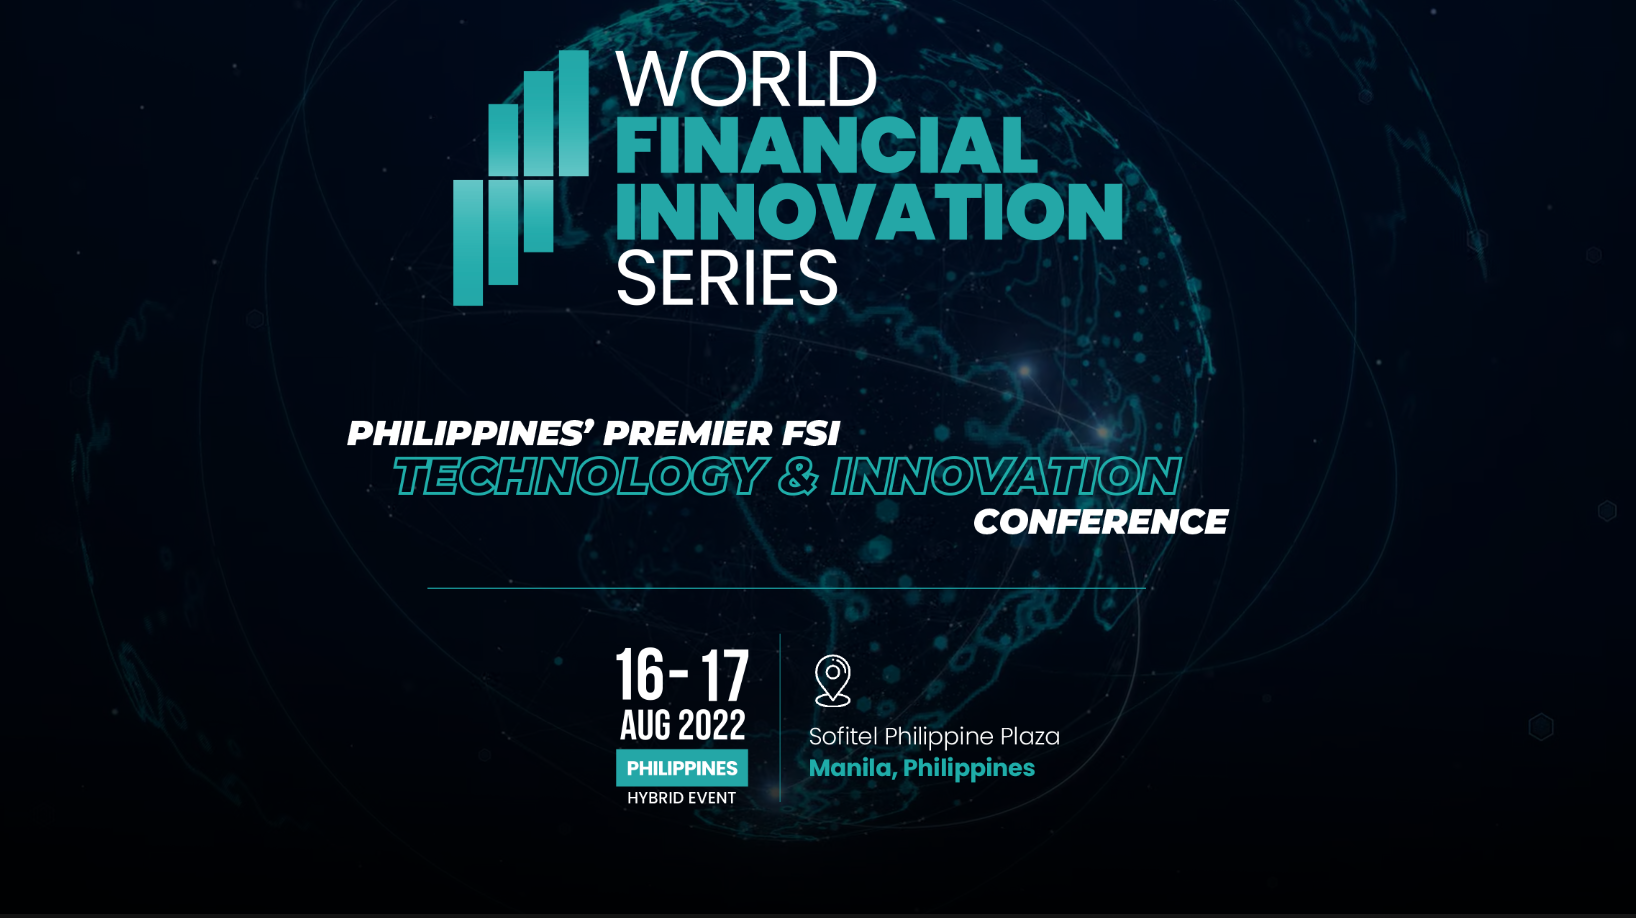 ASEAN’s Most Influential Fintech Event - WFIS, Now Ready to Disrupt Philippines’ FSI Market